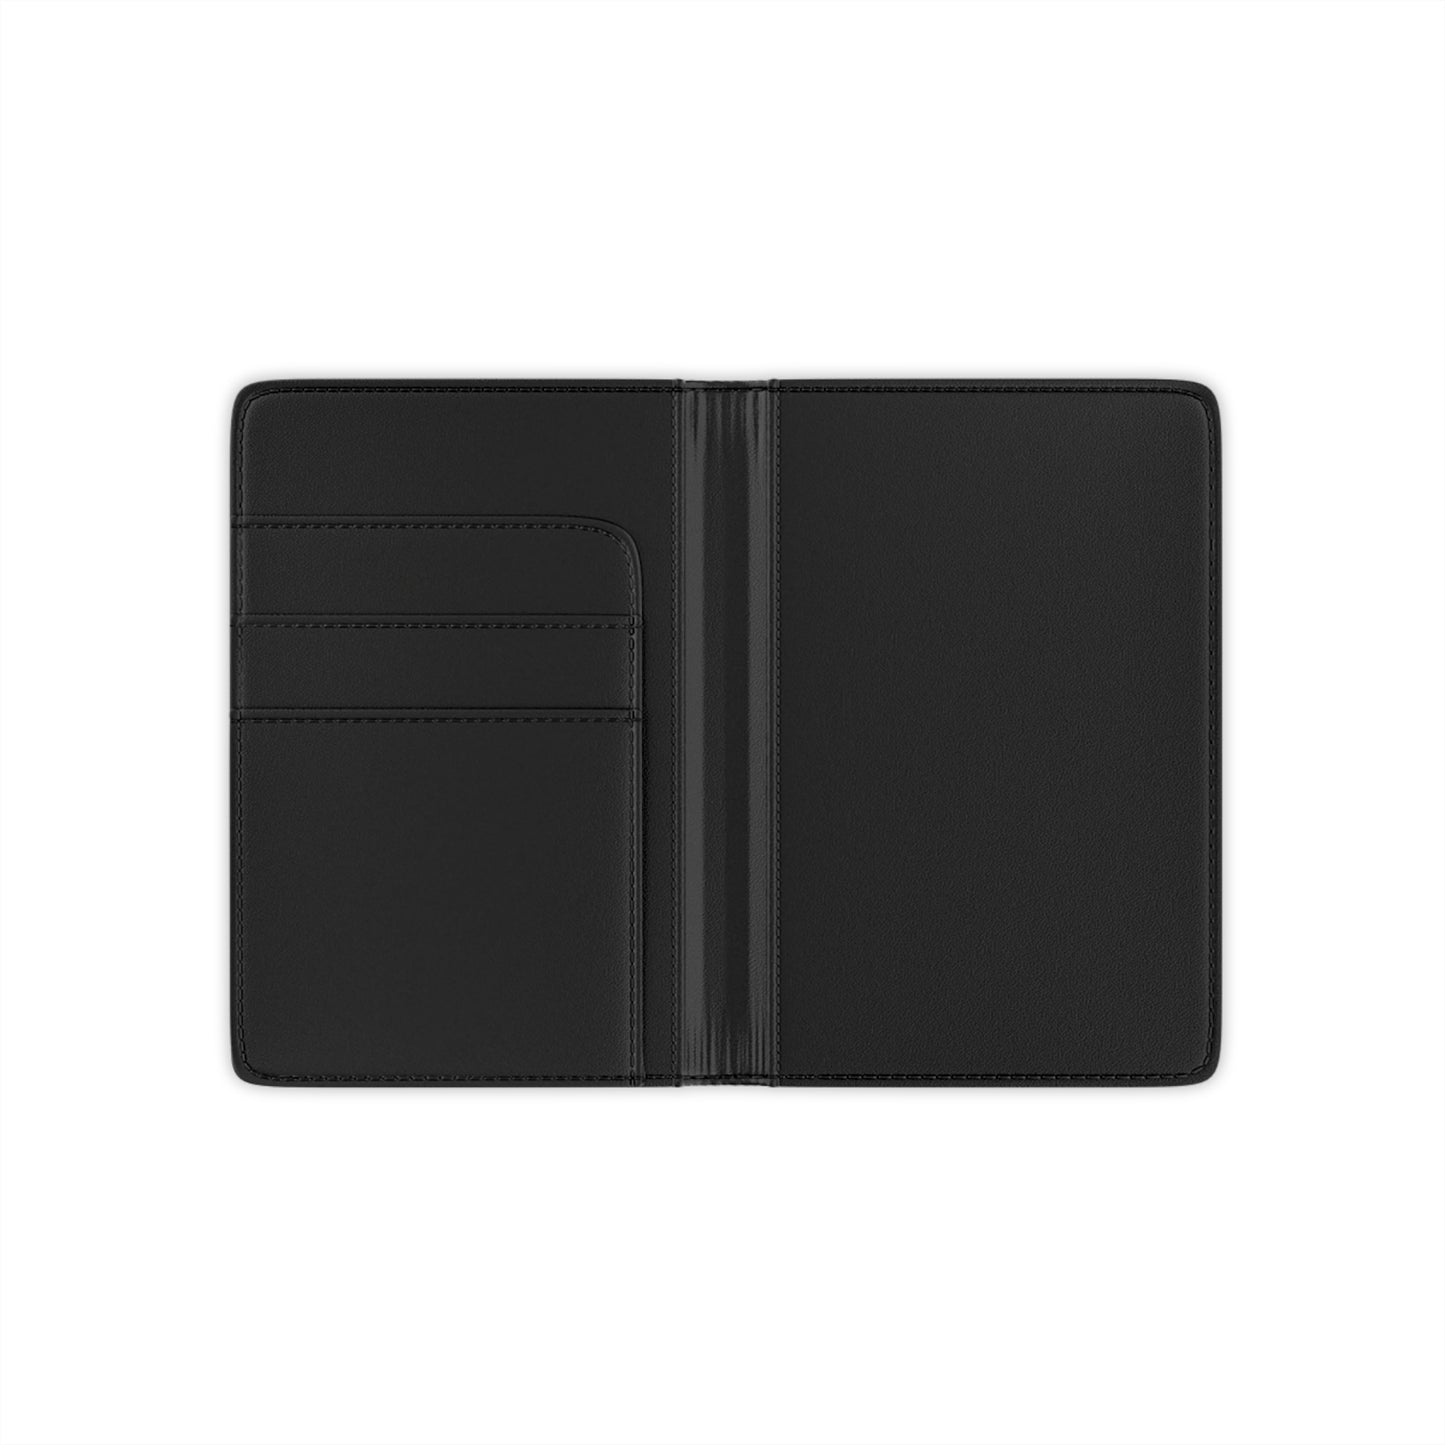 PIXELS OUTFITTERS PASSPORT COVER